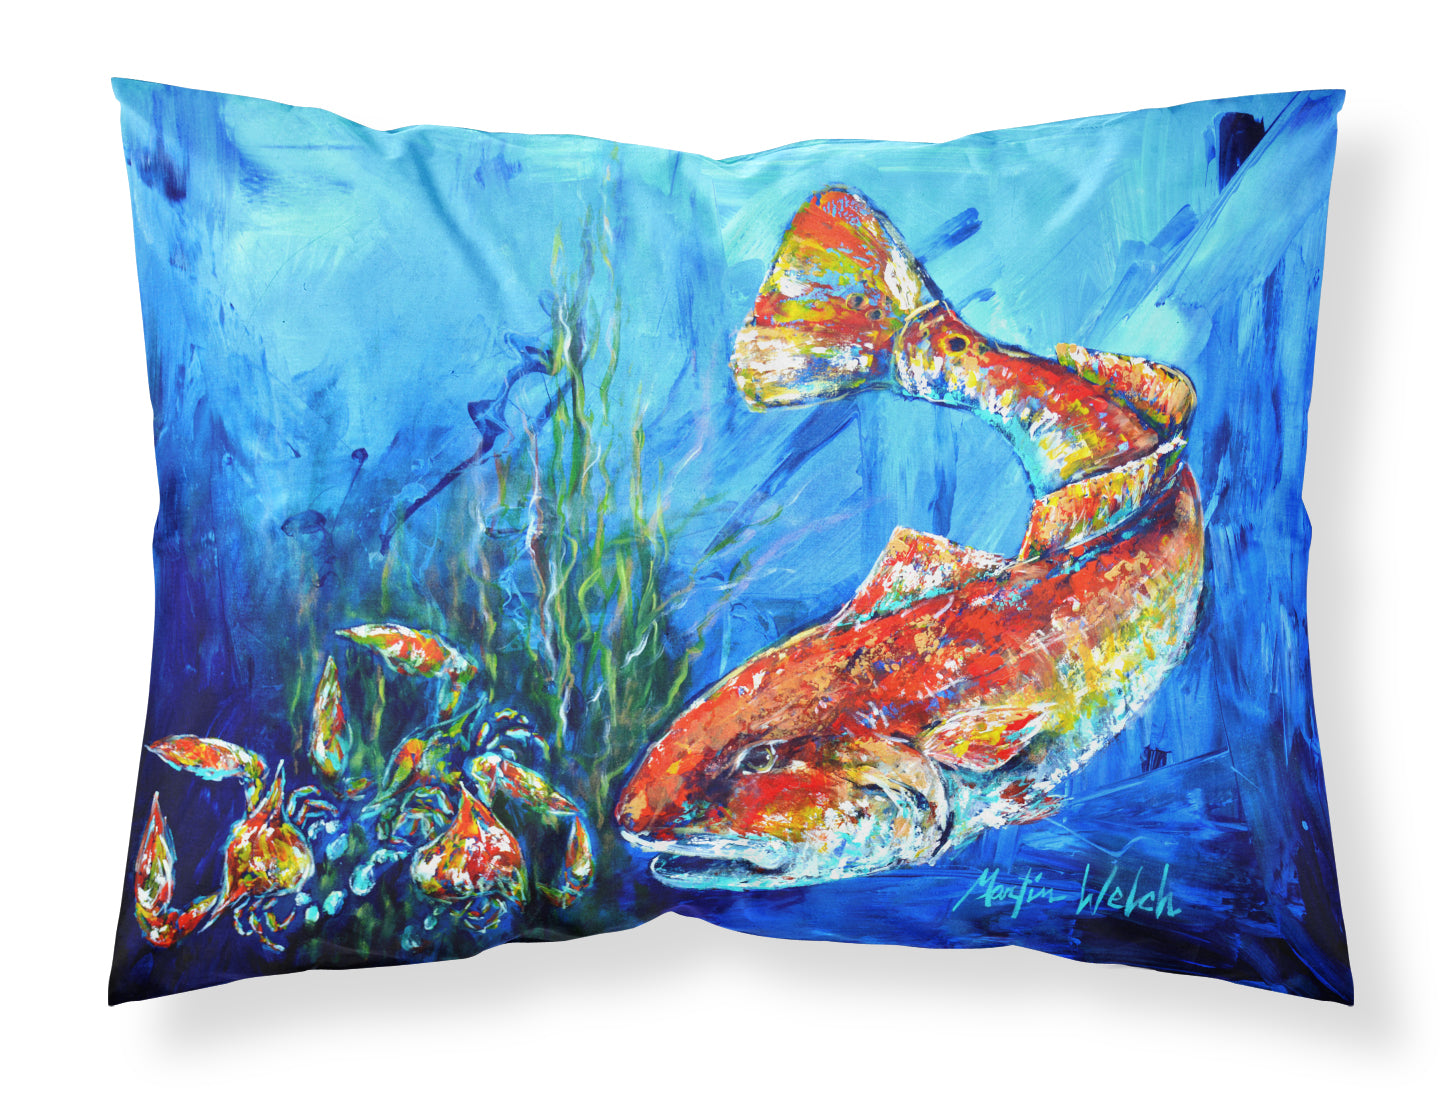 Buy this Scattered Red Fish Fabric Standard Pillowcase